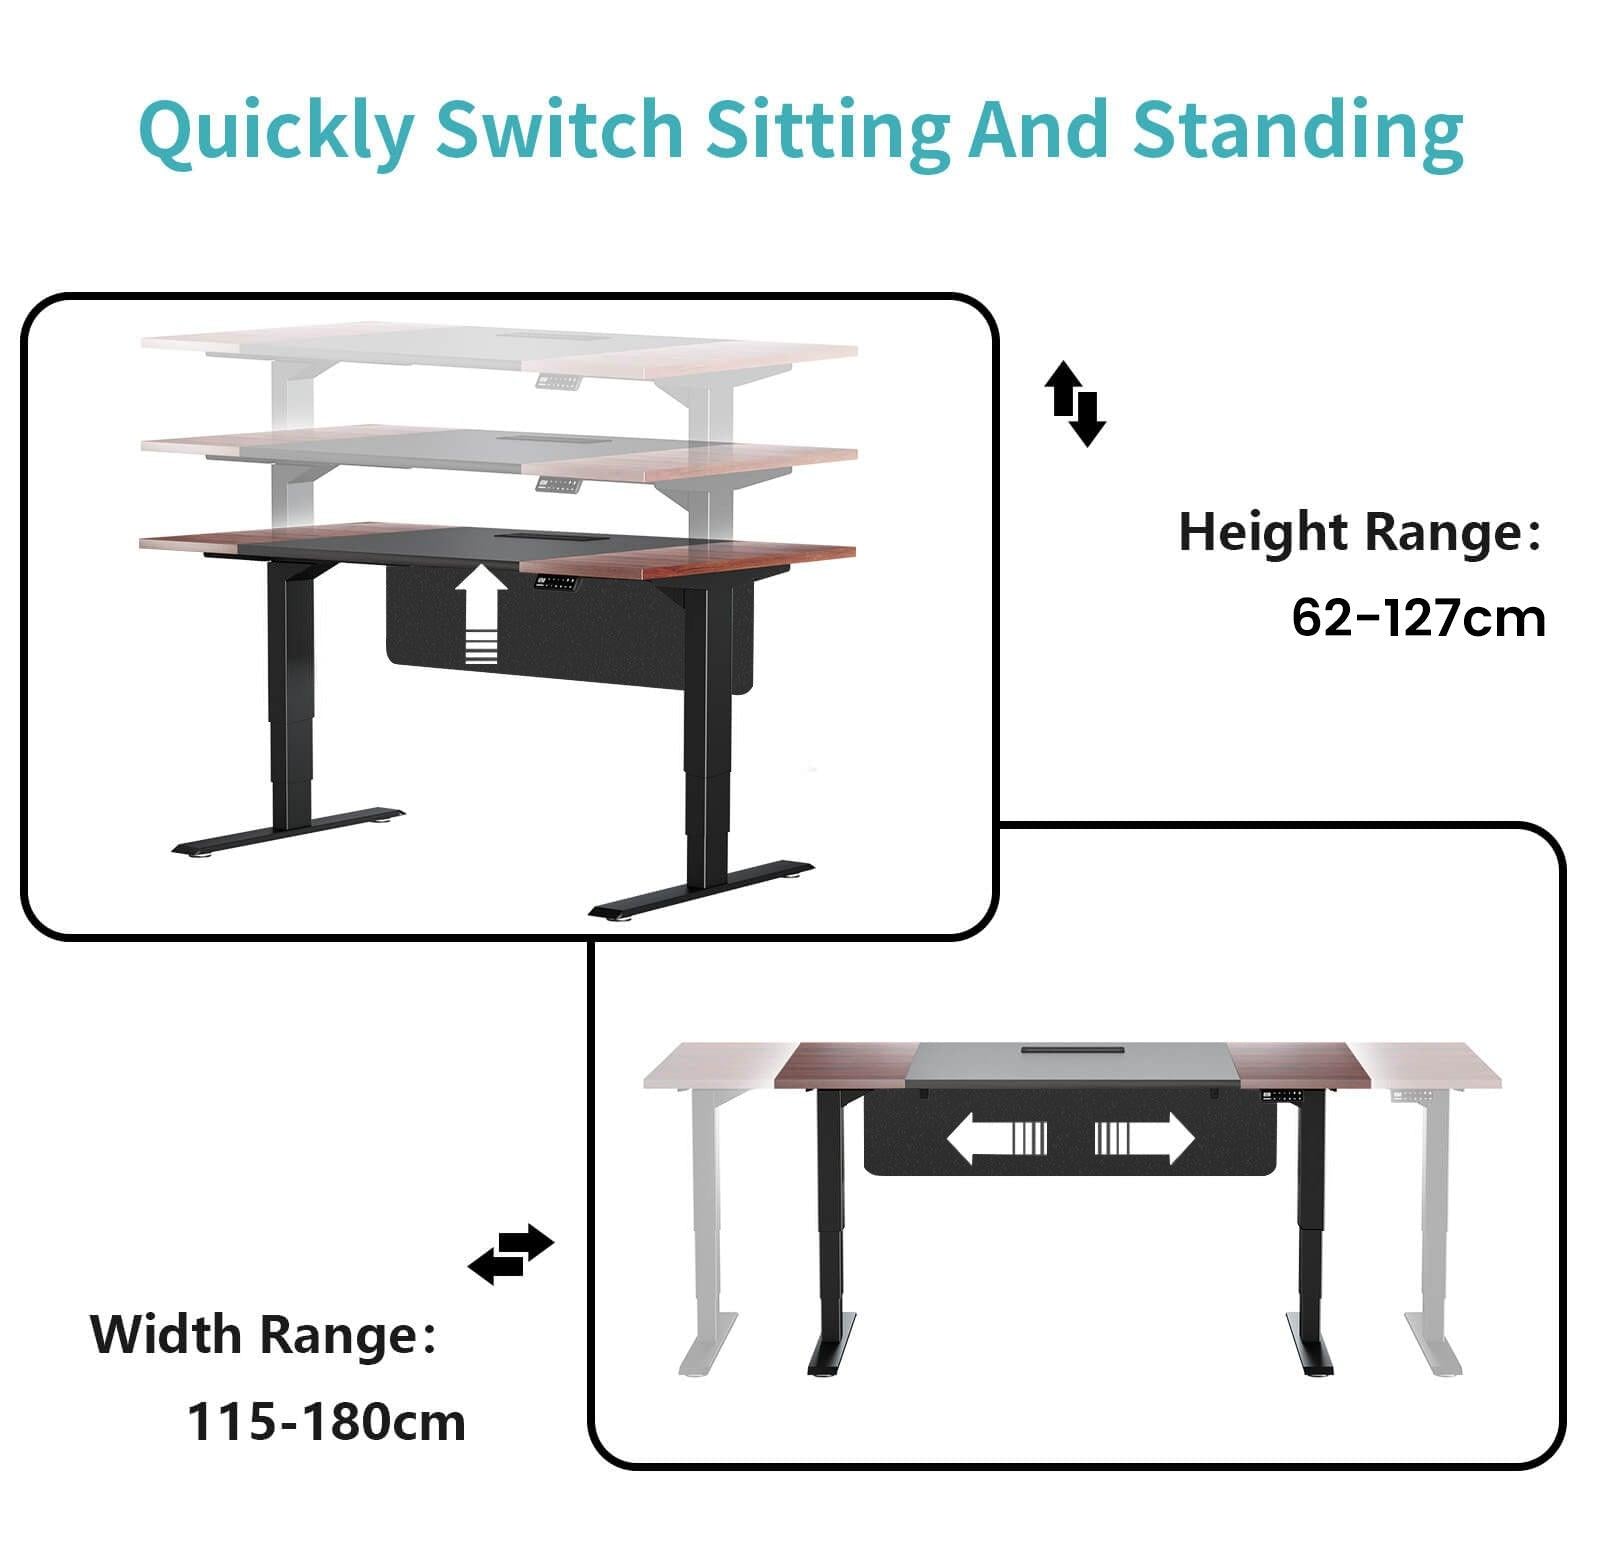 Large 180x80cm standing desk is best for 5-6.3 ft people use